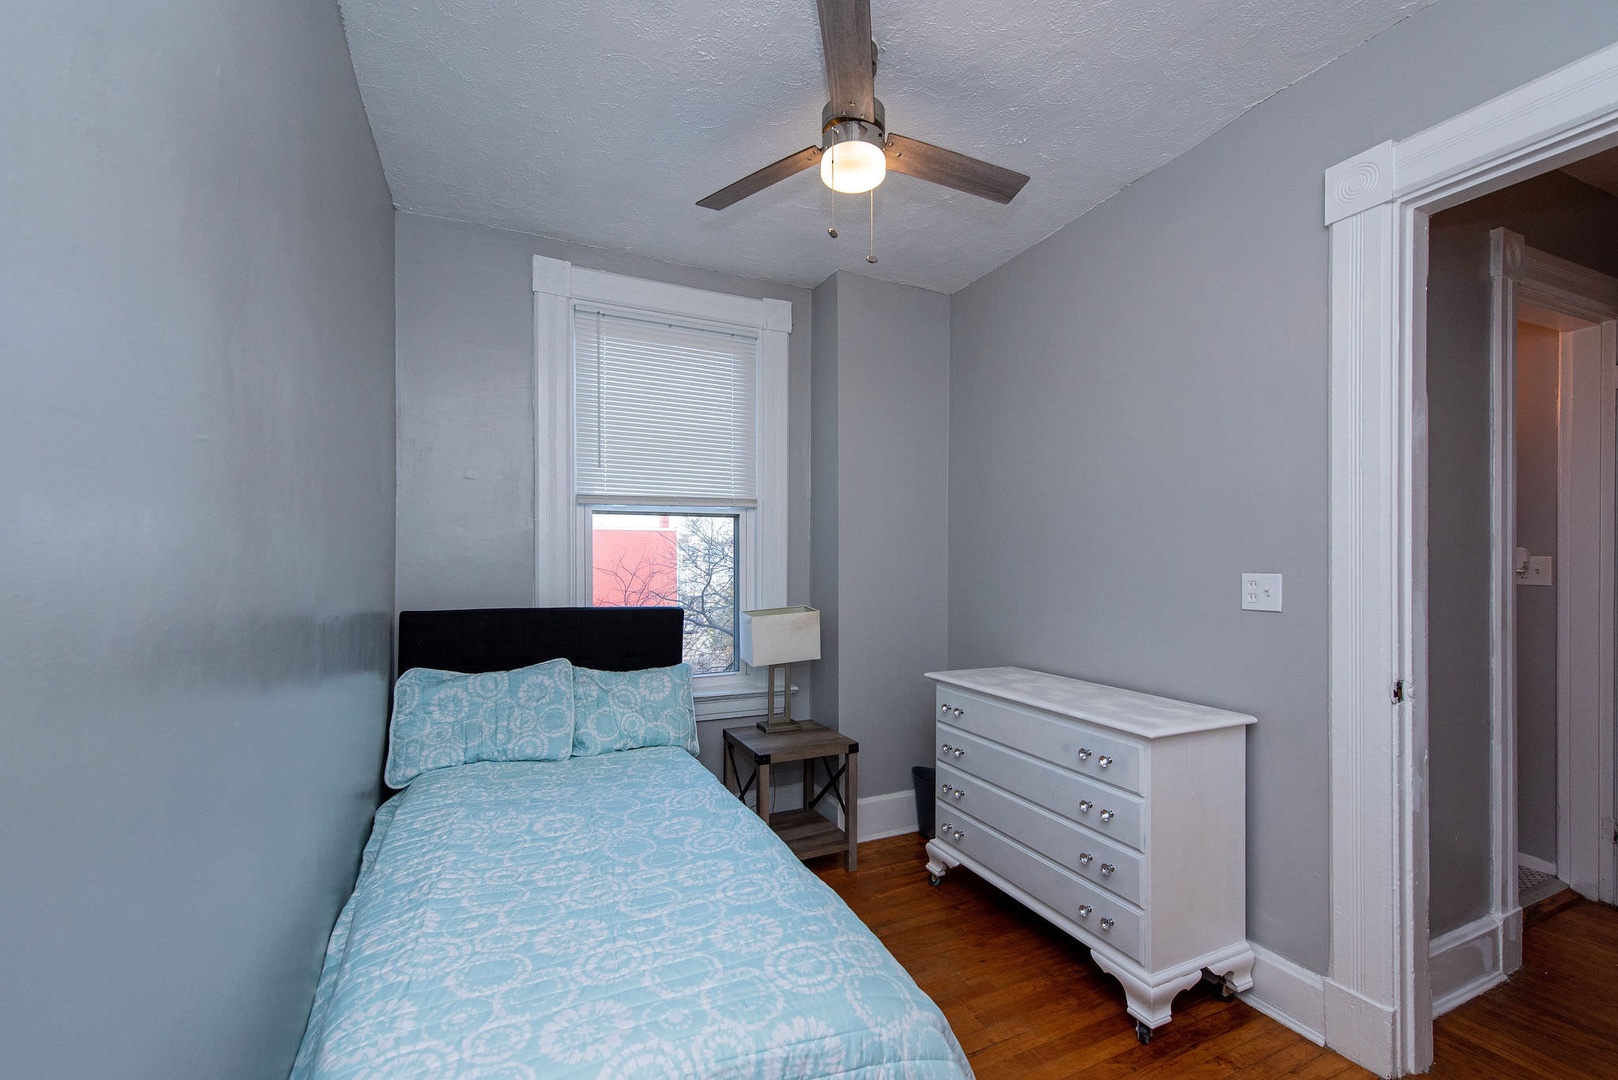 This cozy bedroom offers a twin bed, dresser, & ceiling fan